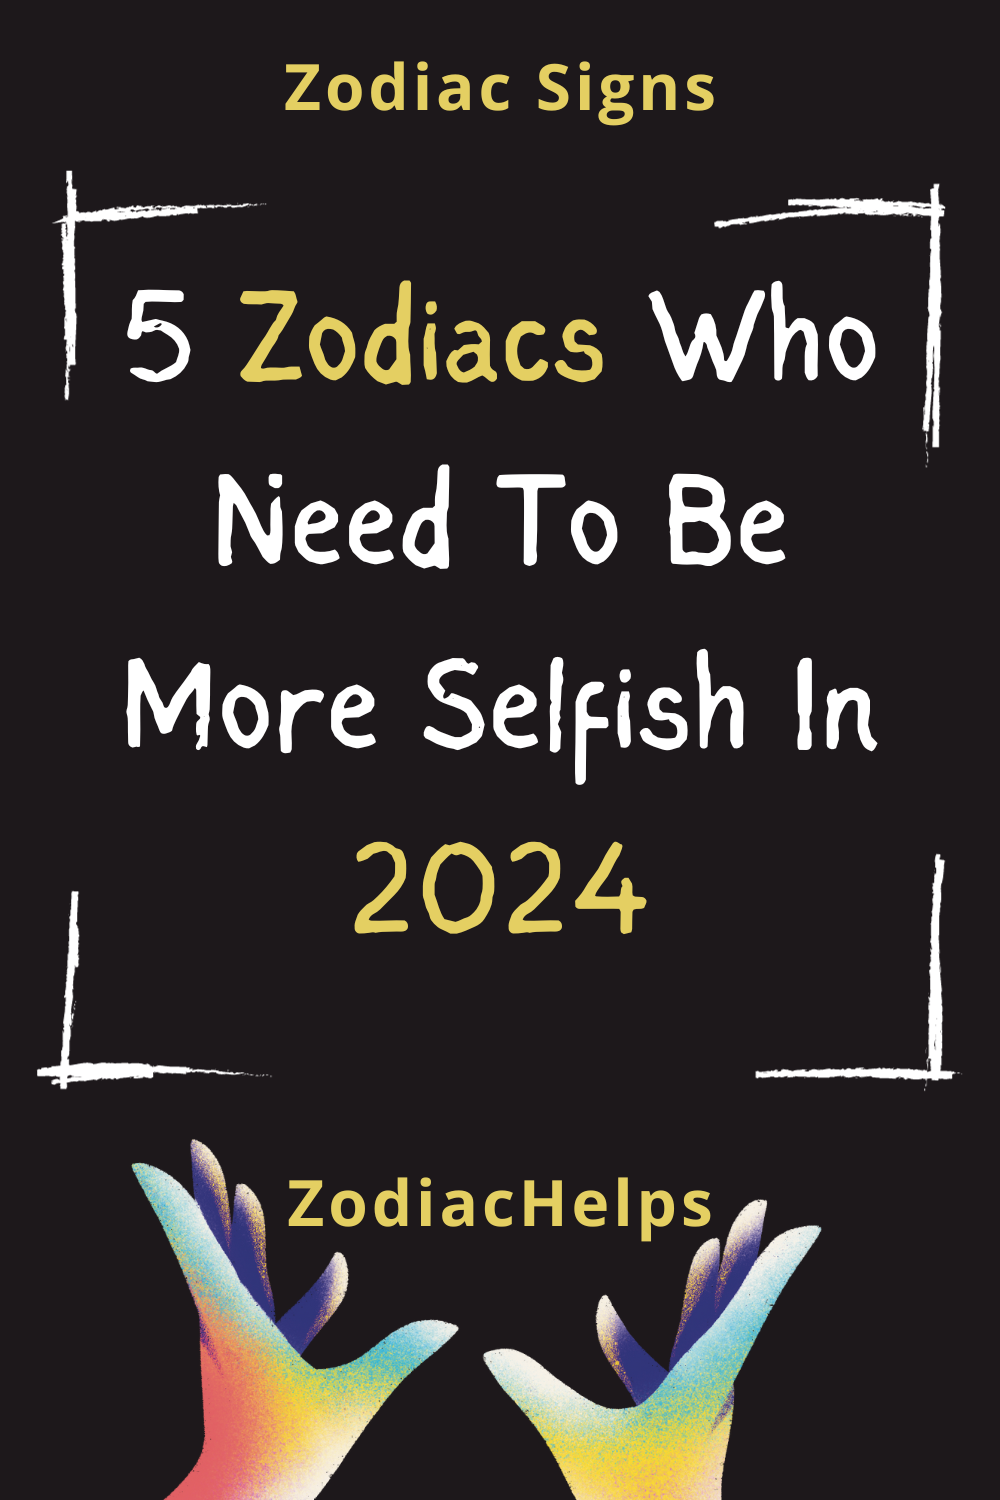 5 Zodiacs Who Need To Be More Selfish In 2024